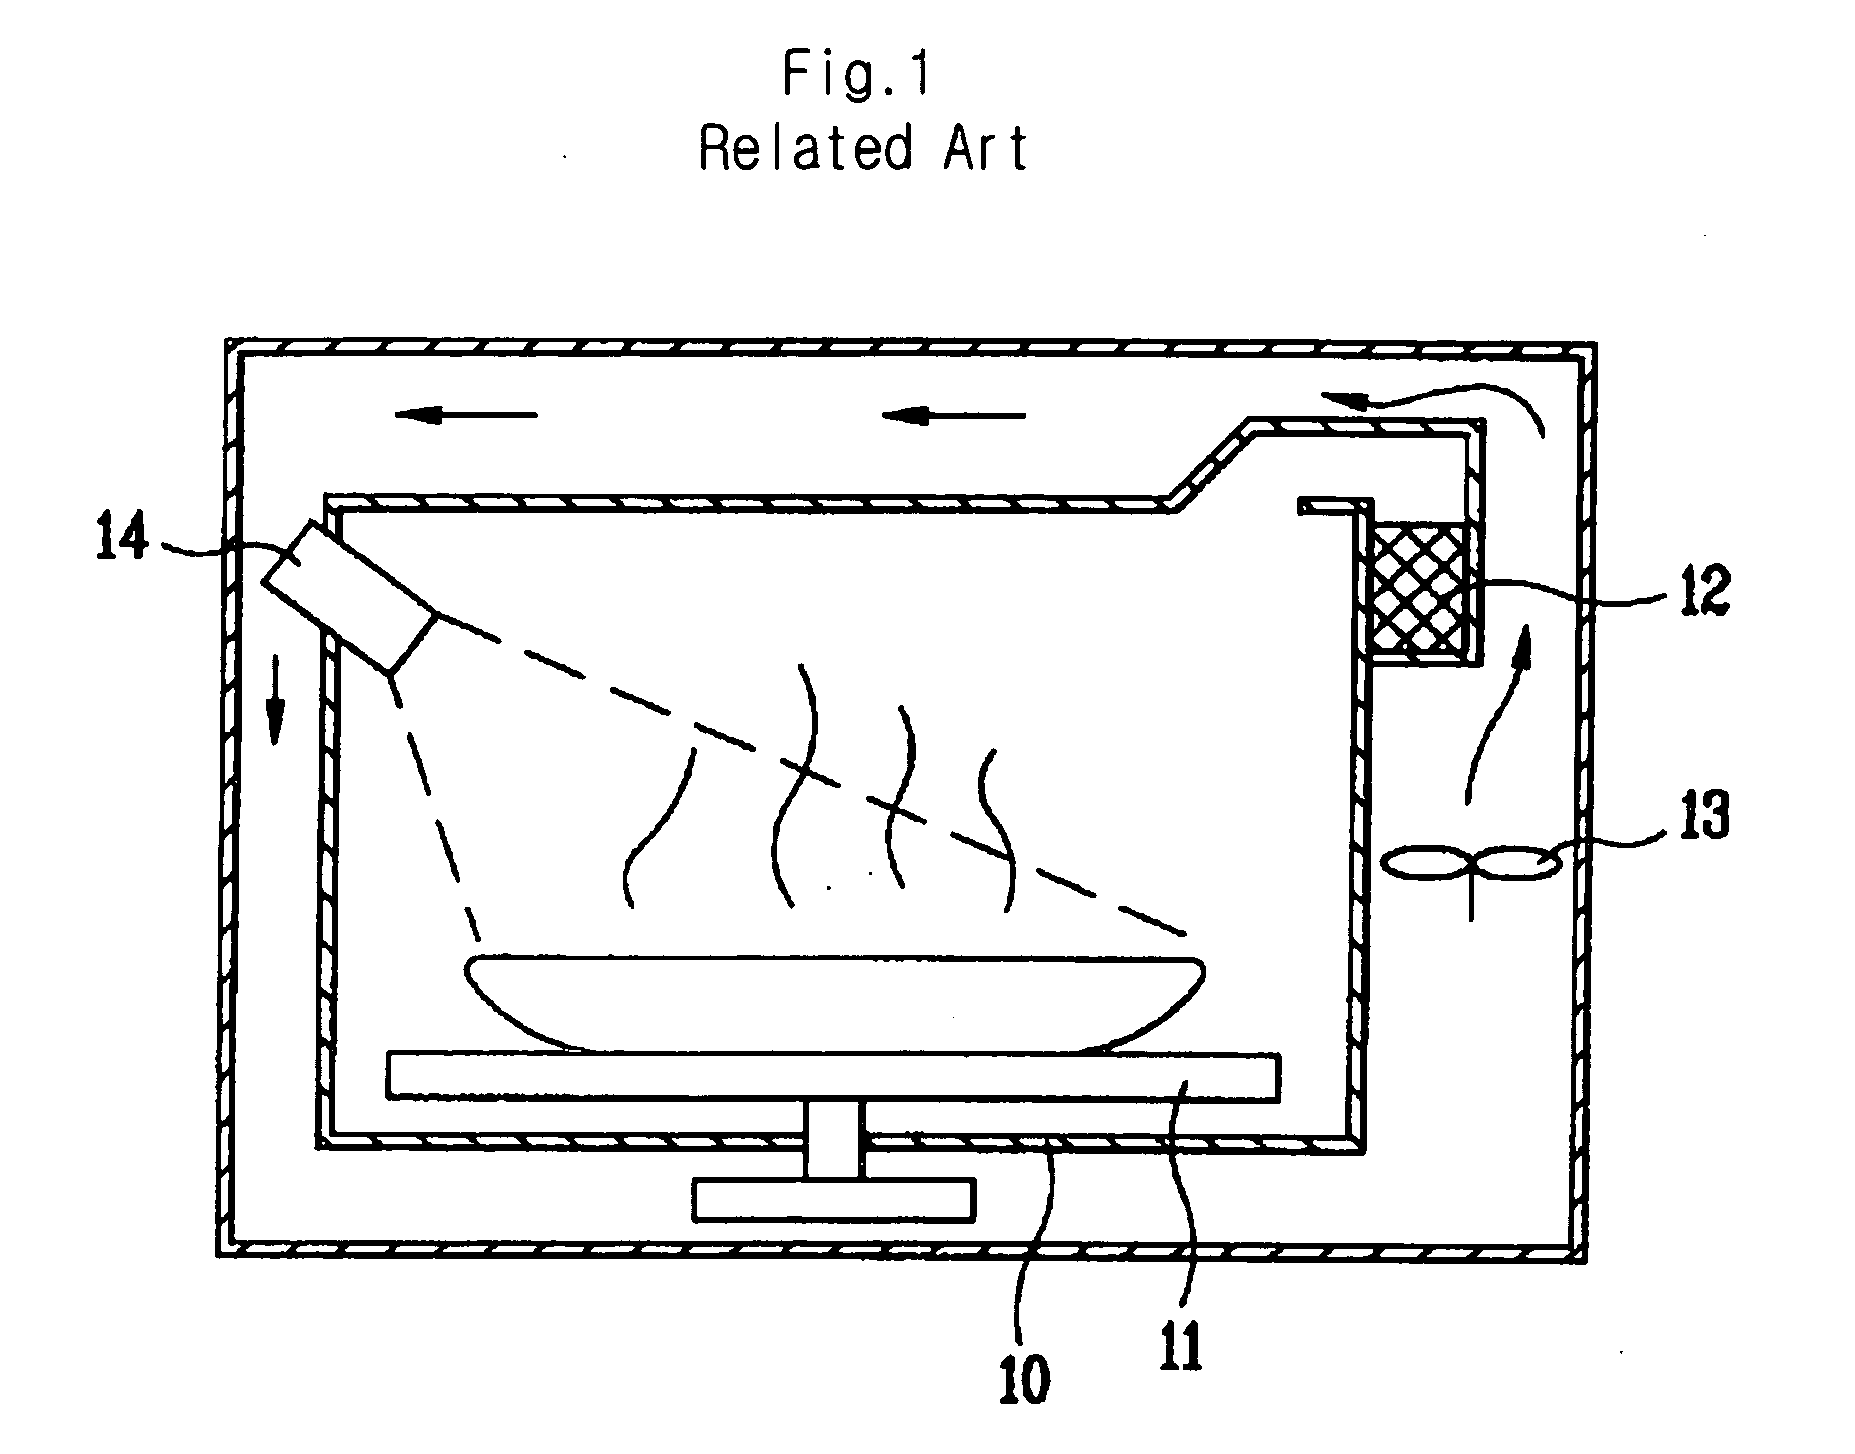 Apparatus and method for transmitting and receiving data in microwave oven